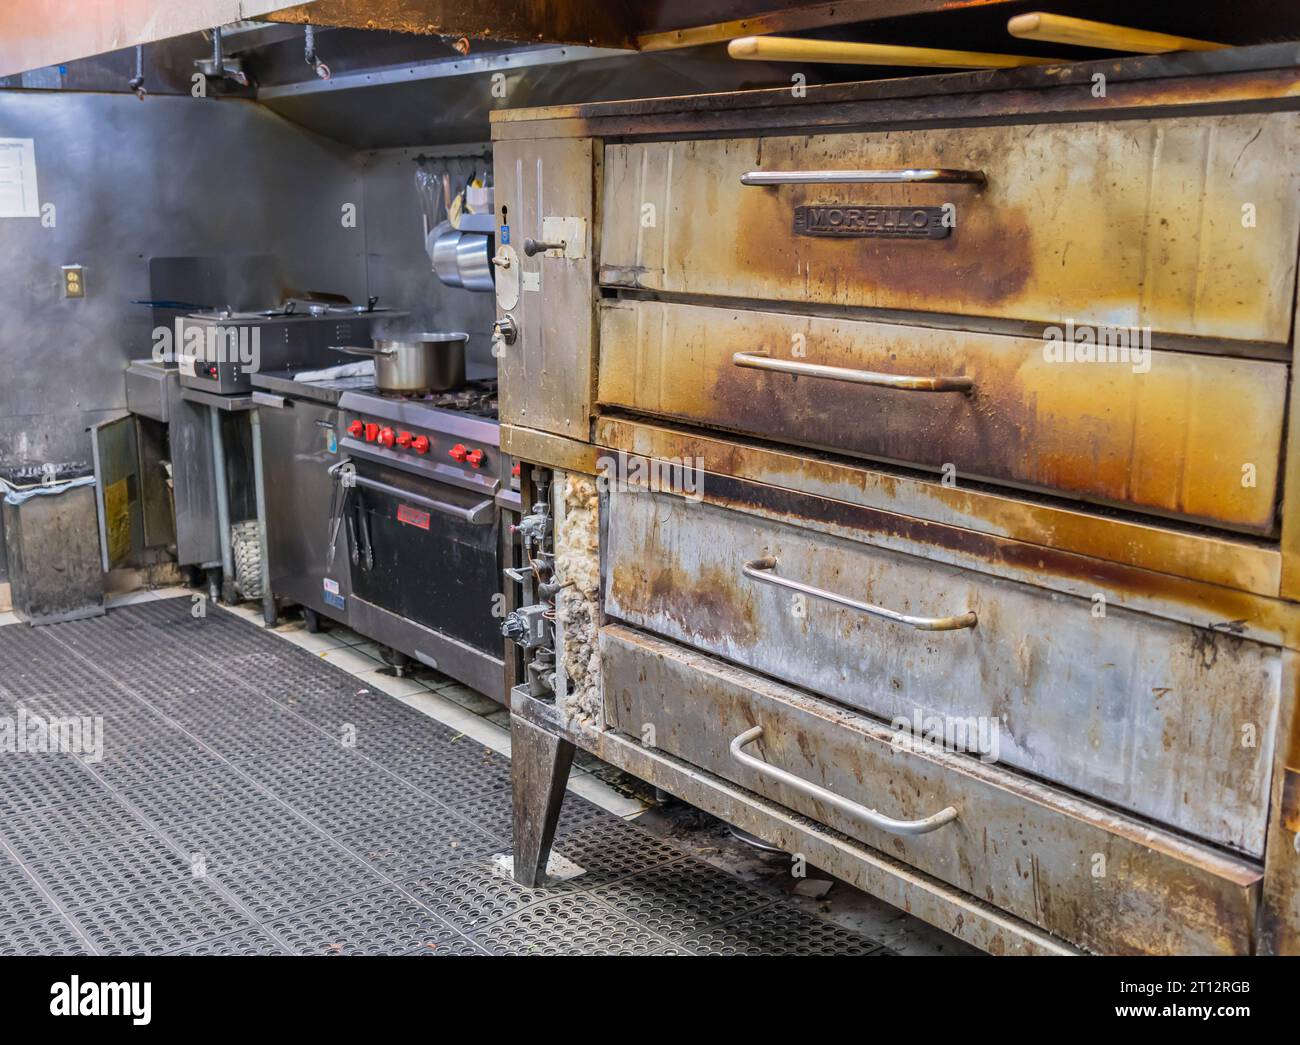 Pizza ovens, a stove and deep fryer in a pizza shop in Monroeville, Pennsylvania, USA Stock Photo